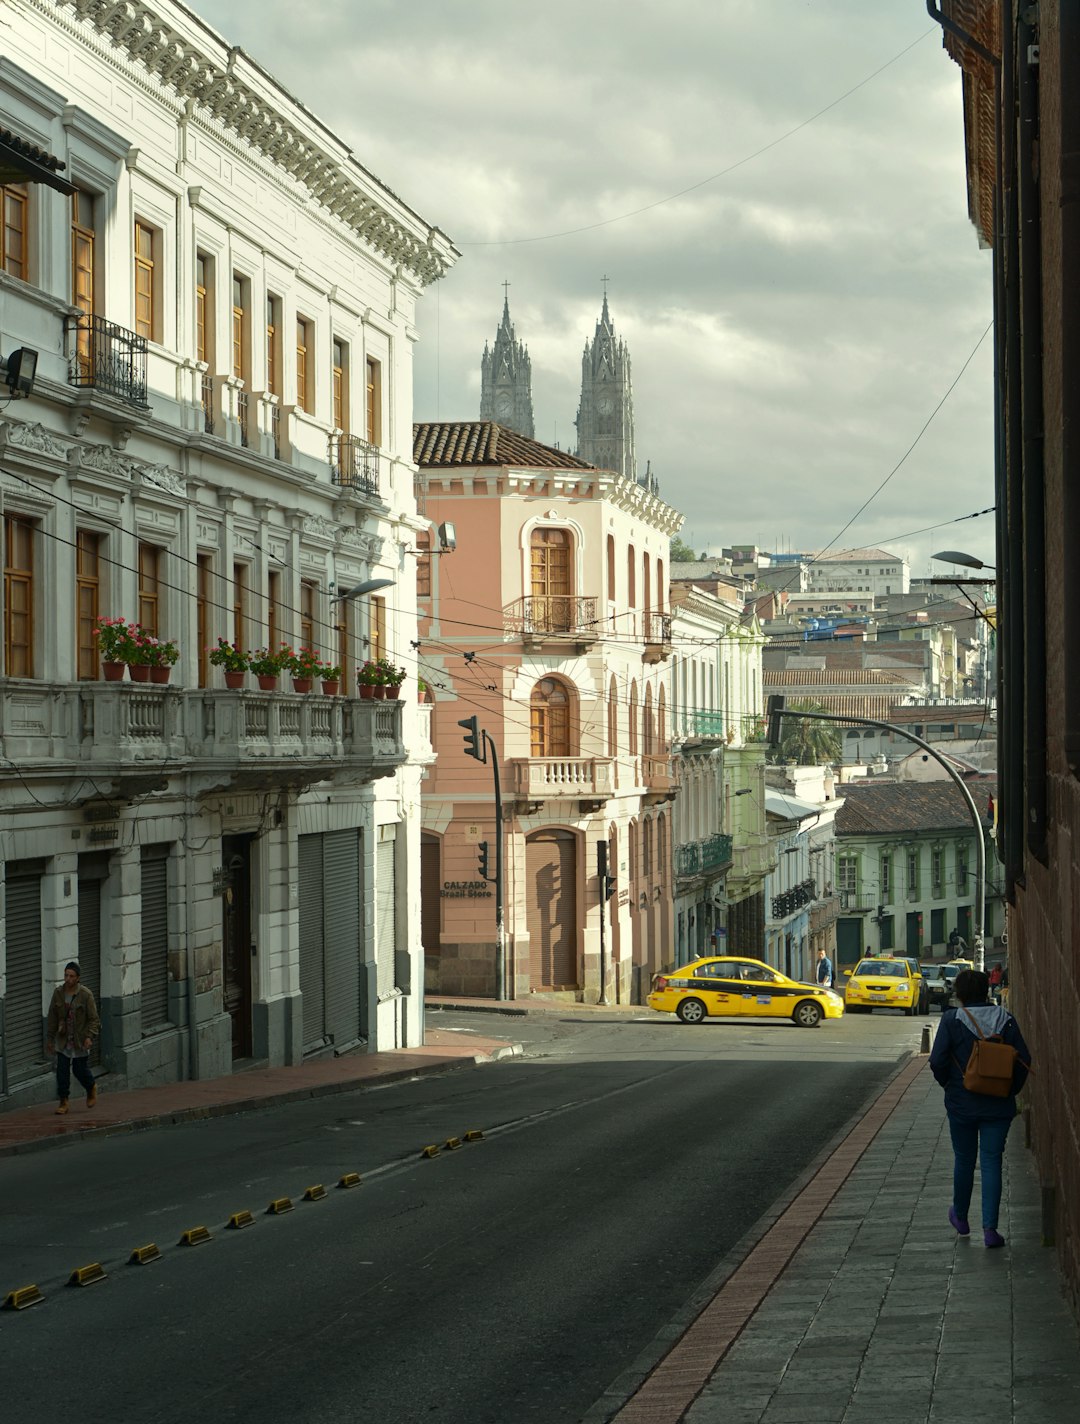 Travel Tips and Stories of Quito in Ecuador